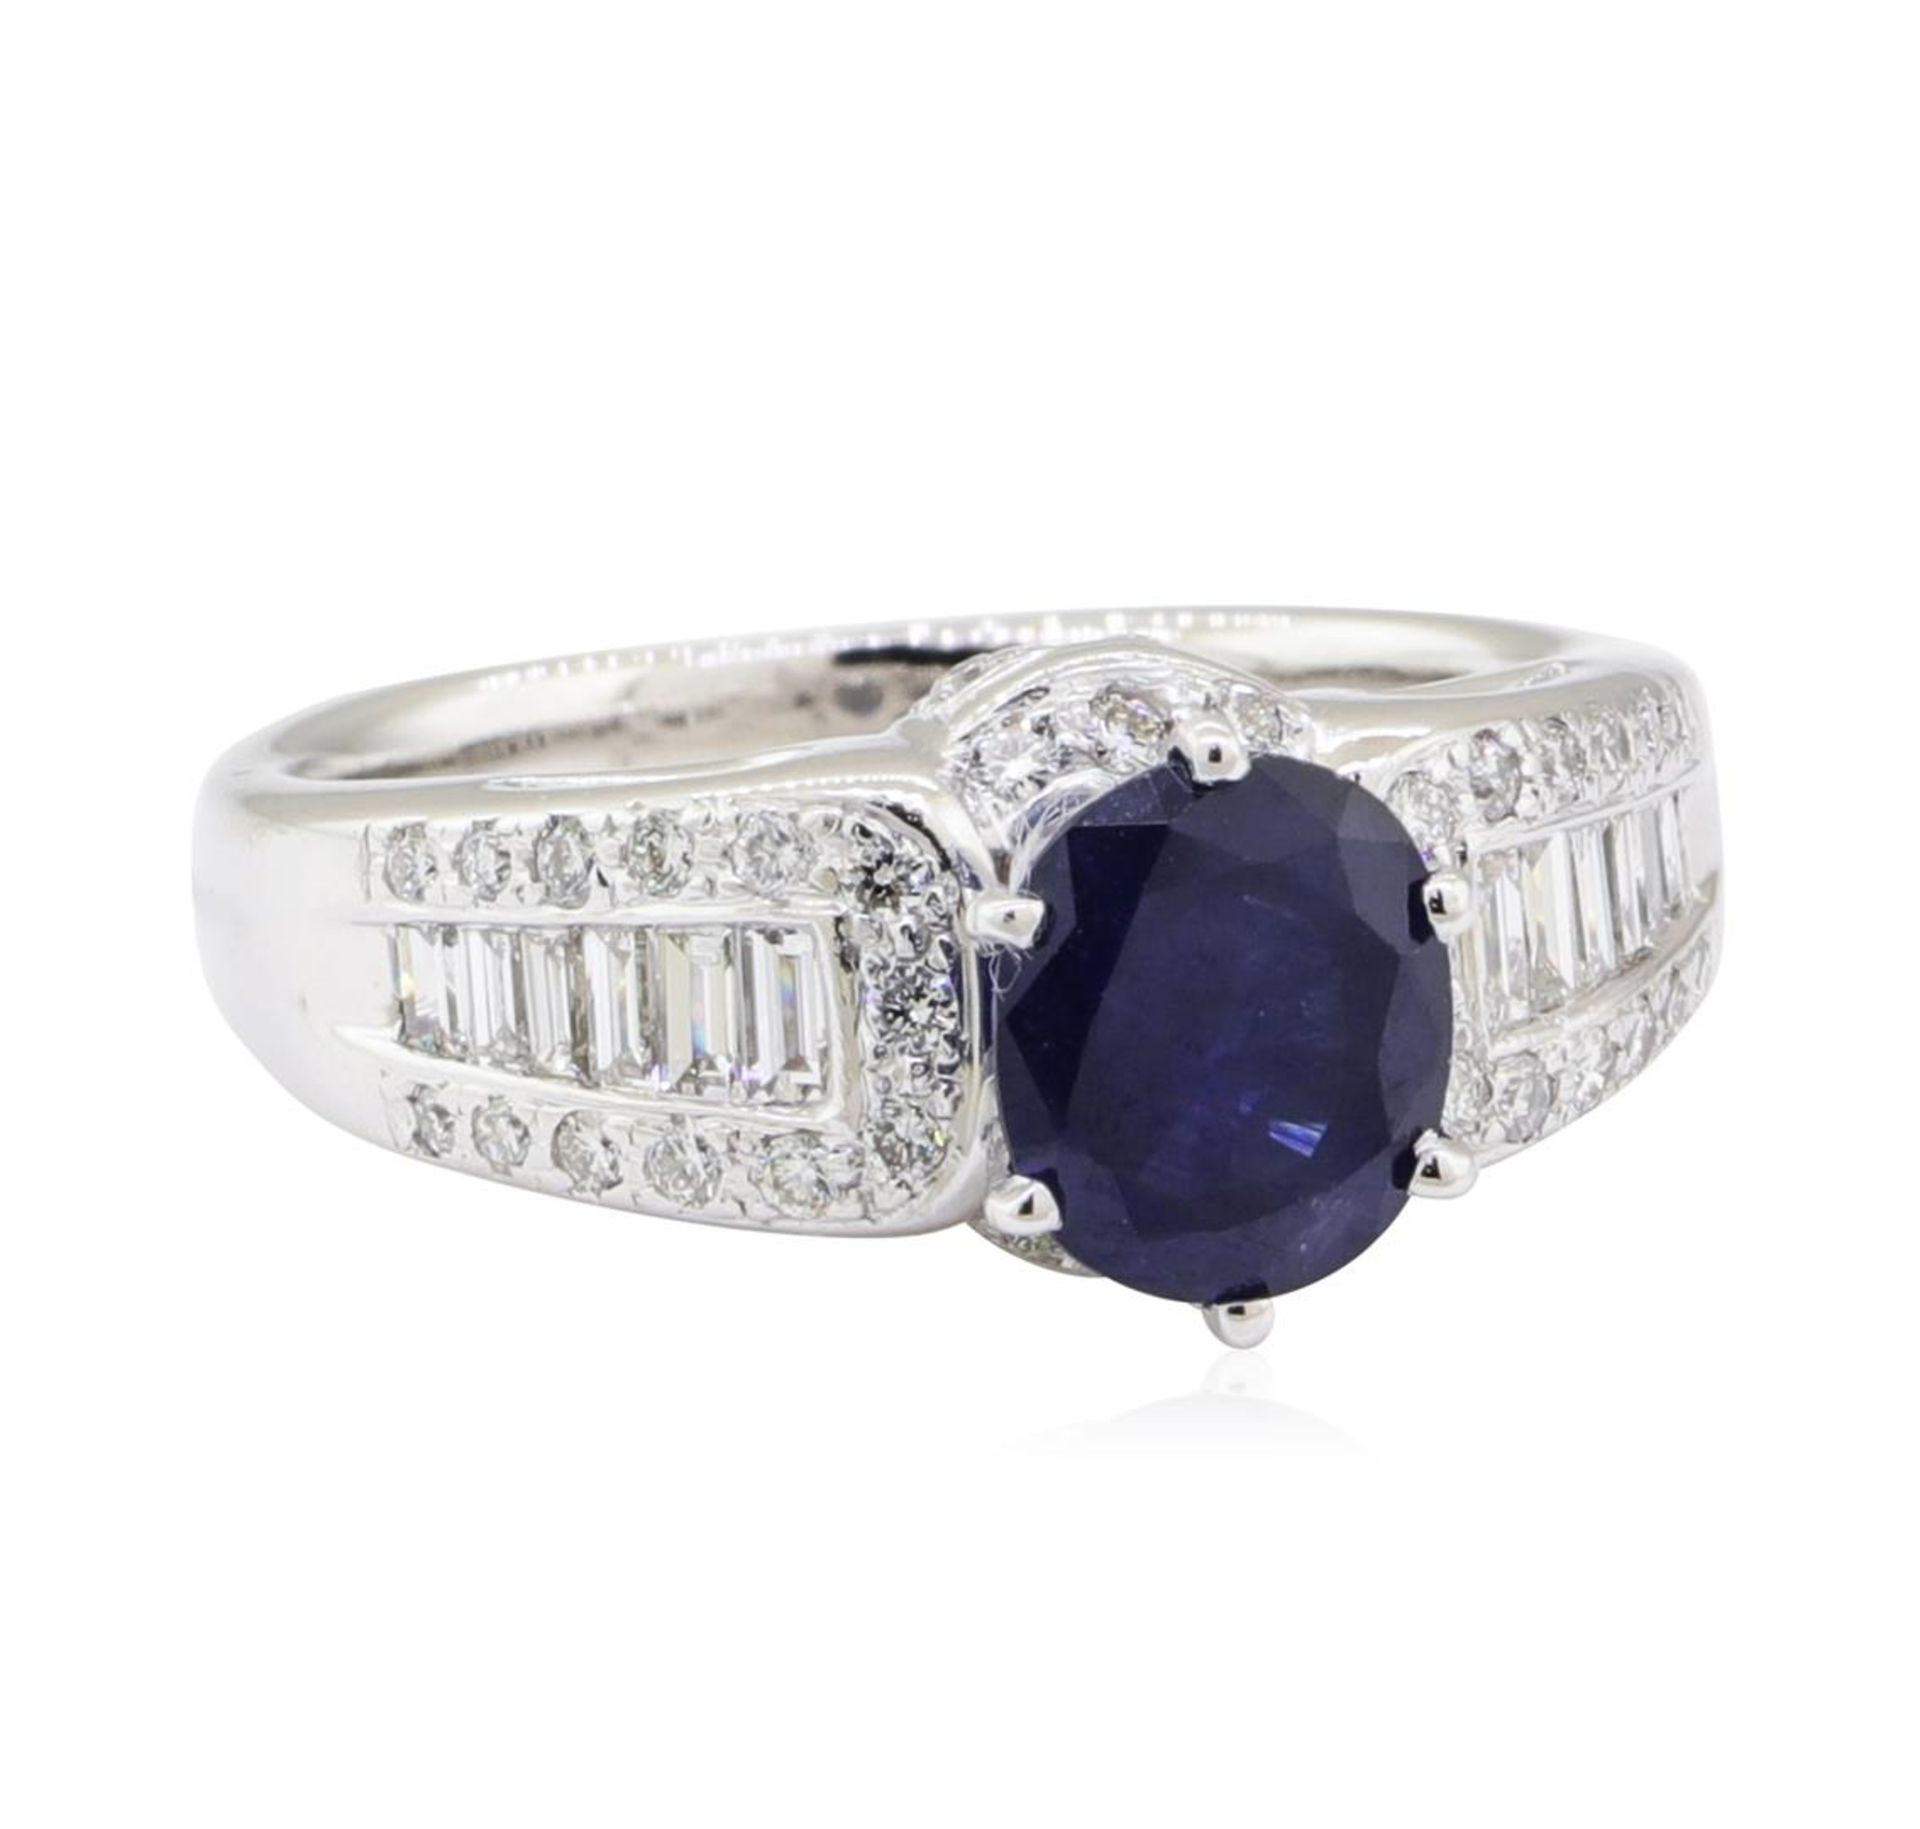 2.01 ctw Sapphire and Diamond Ring - 14KT White Gold - Image 2 of 10